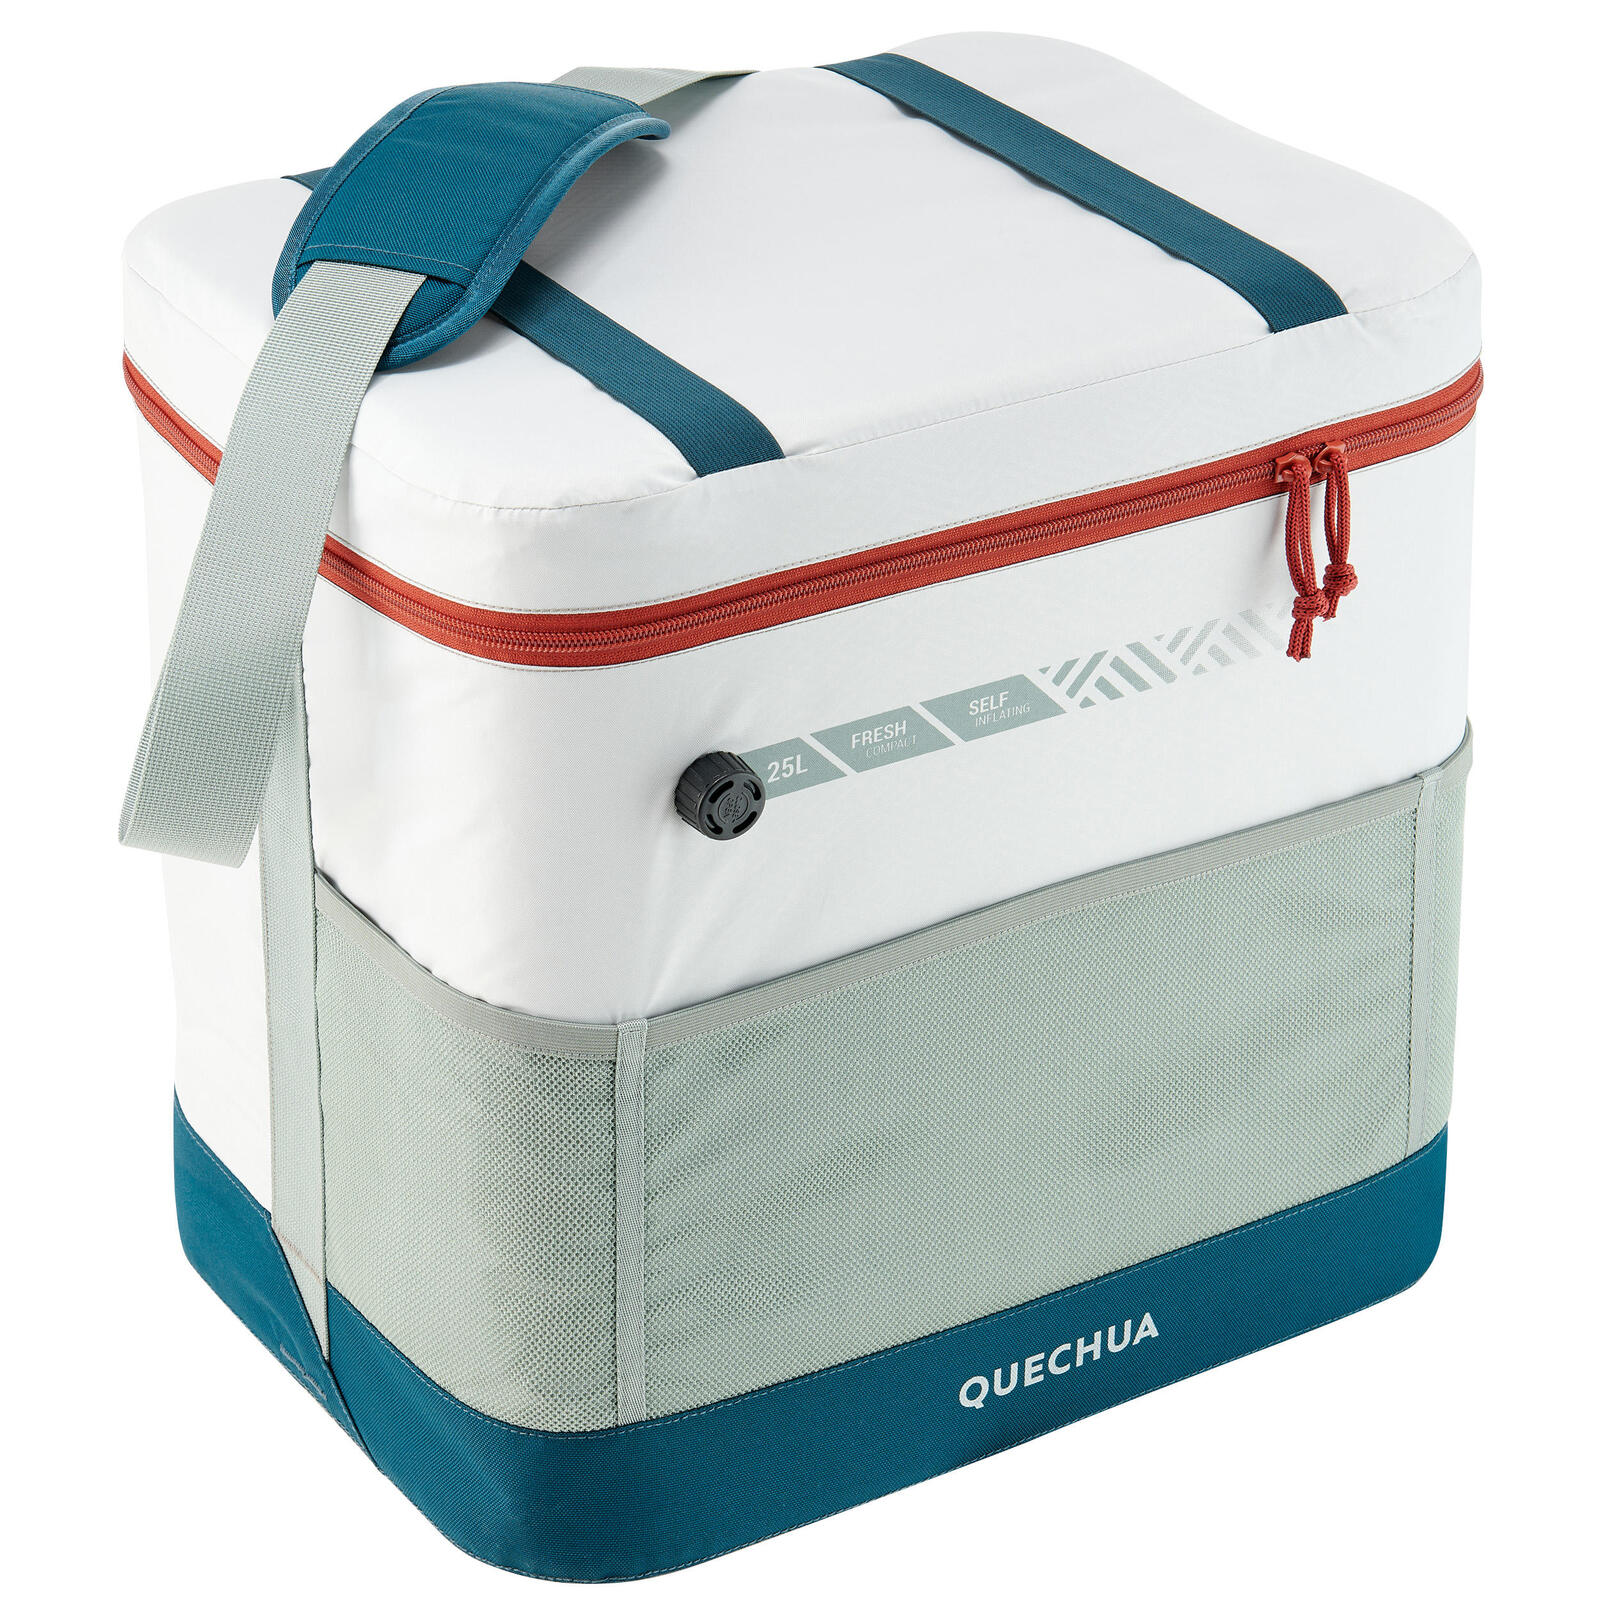 Inflatable camping or hiking cooler - compact fresh - 25 l